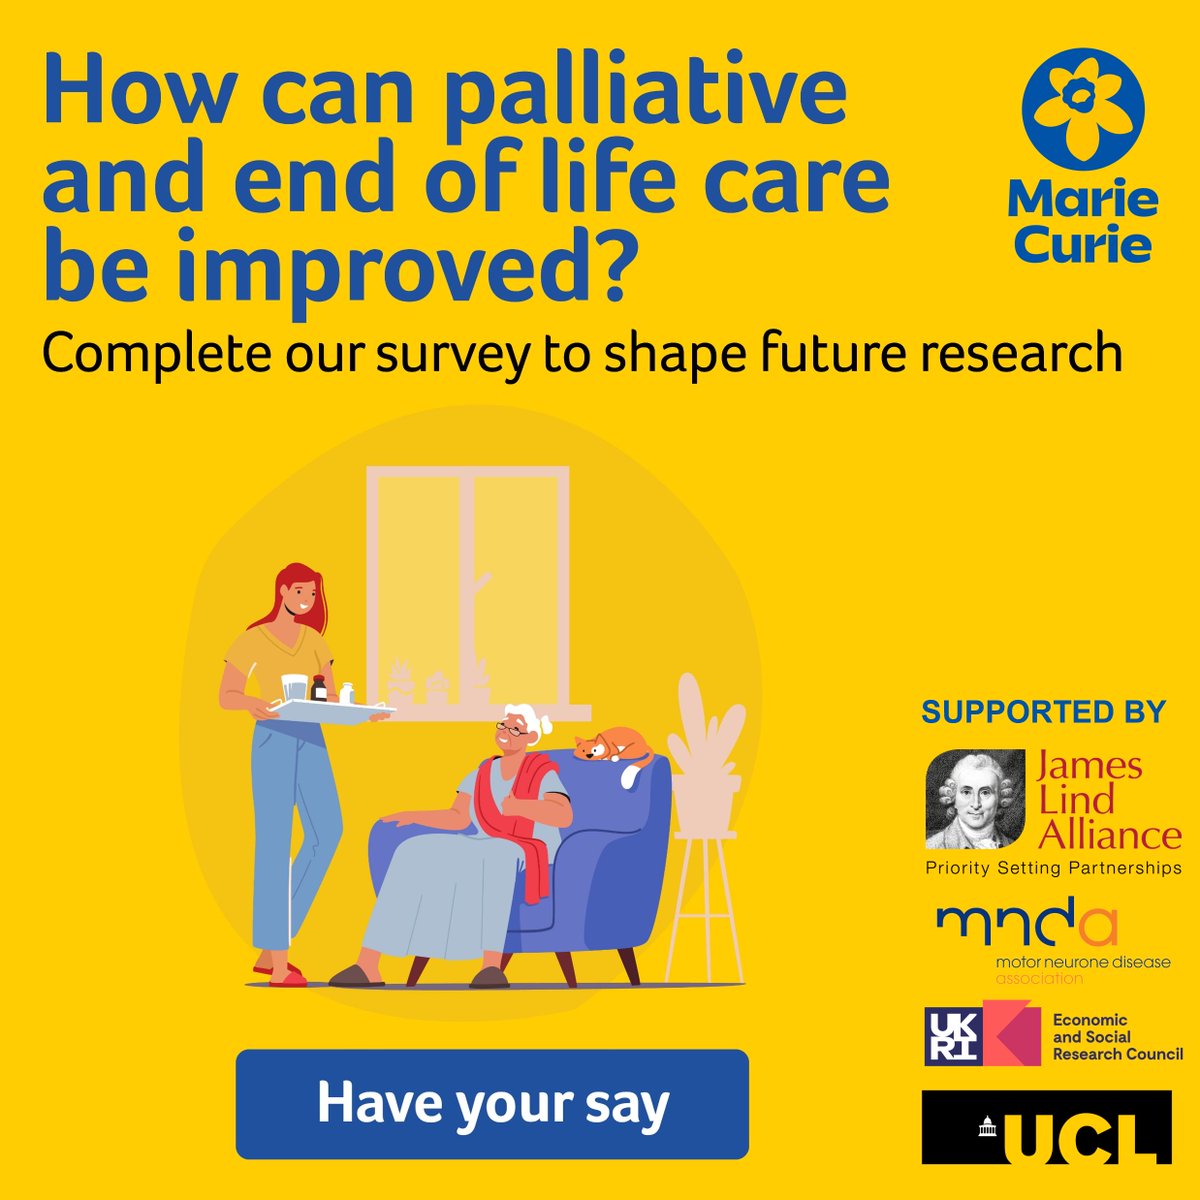 📢 Last chance to complete our survey to help determine the priorities for palliative & end of life care research: bit.ly/47Ckx3P If you've been affected by dying, death & bereavement, or are a health / social care professional we want to hear from you. ⏰Closes Monday.